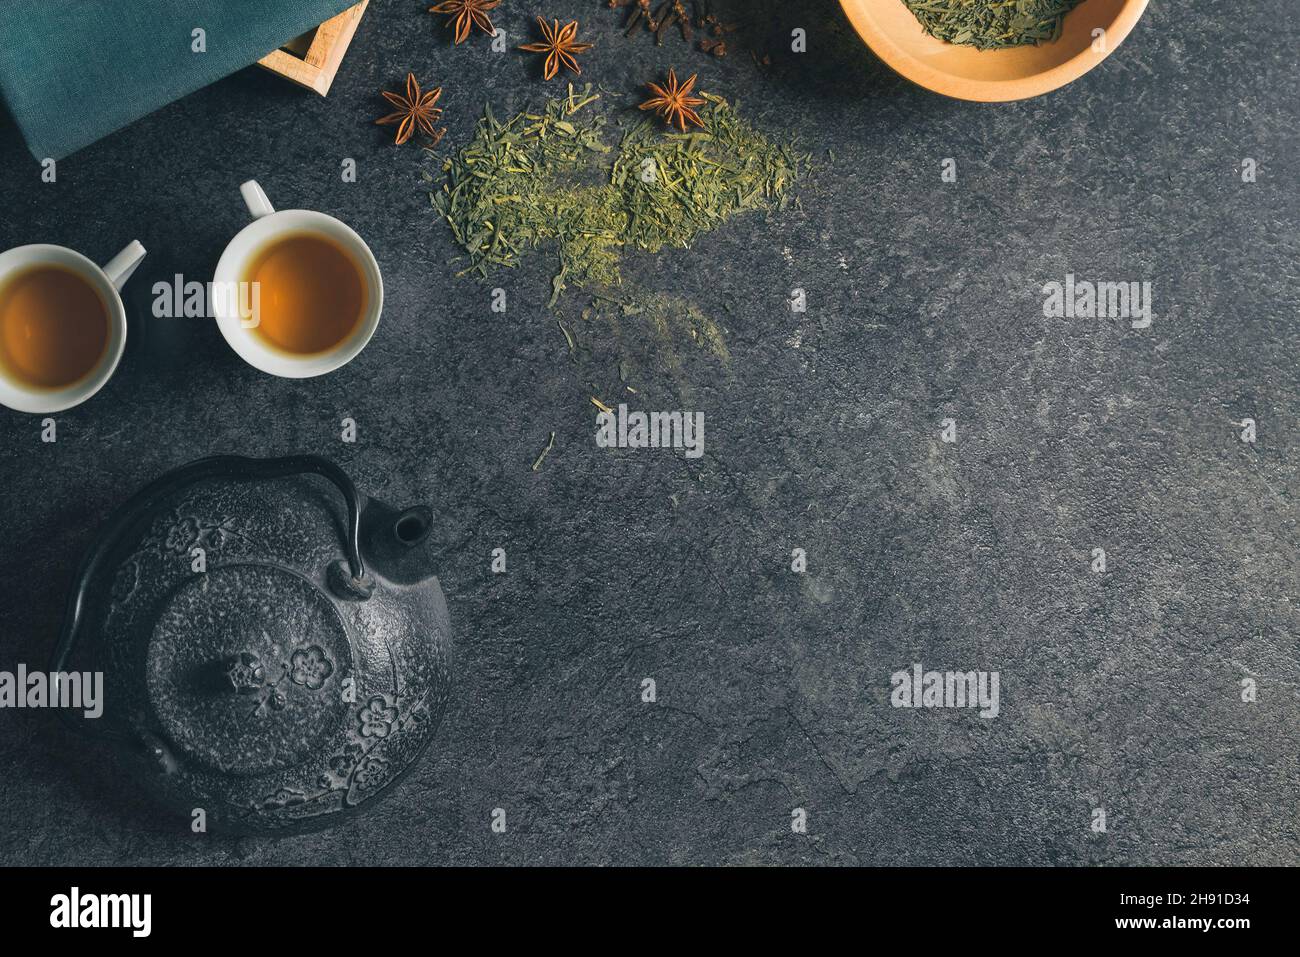 Top studio shot of a still life with vintage black metal Japanese tea pot on a dark stone table. Free copy space for caption. Tea ceremony concept Stock Photo